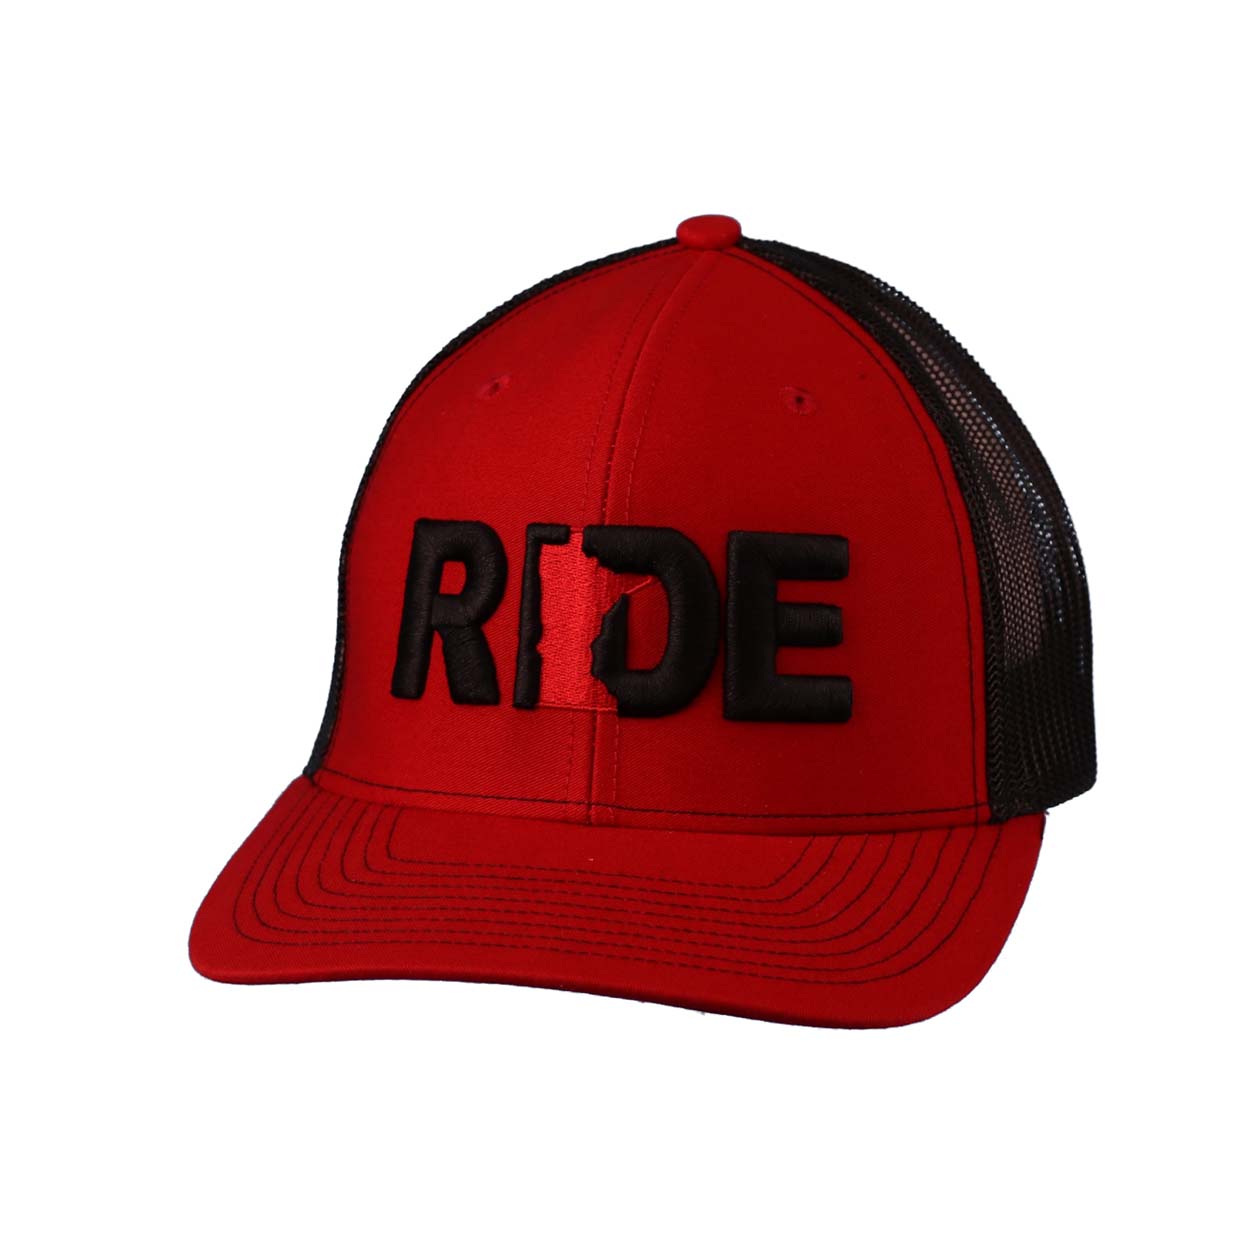 Ride Minnesota Classic Pro 3D Puff Embroidered Snapback Trucker Hat Red/Black